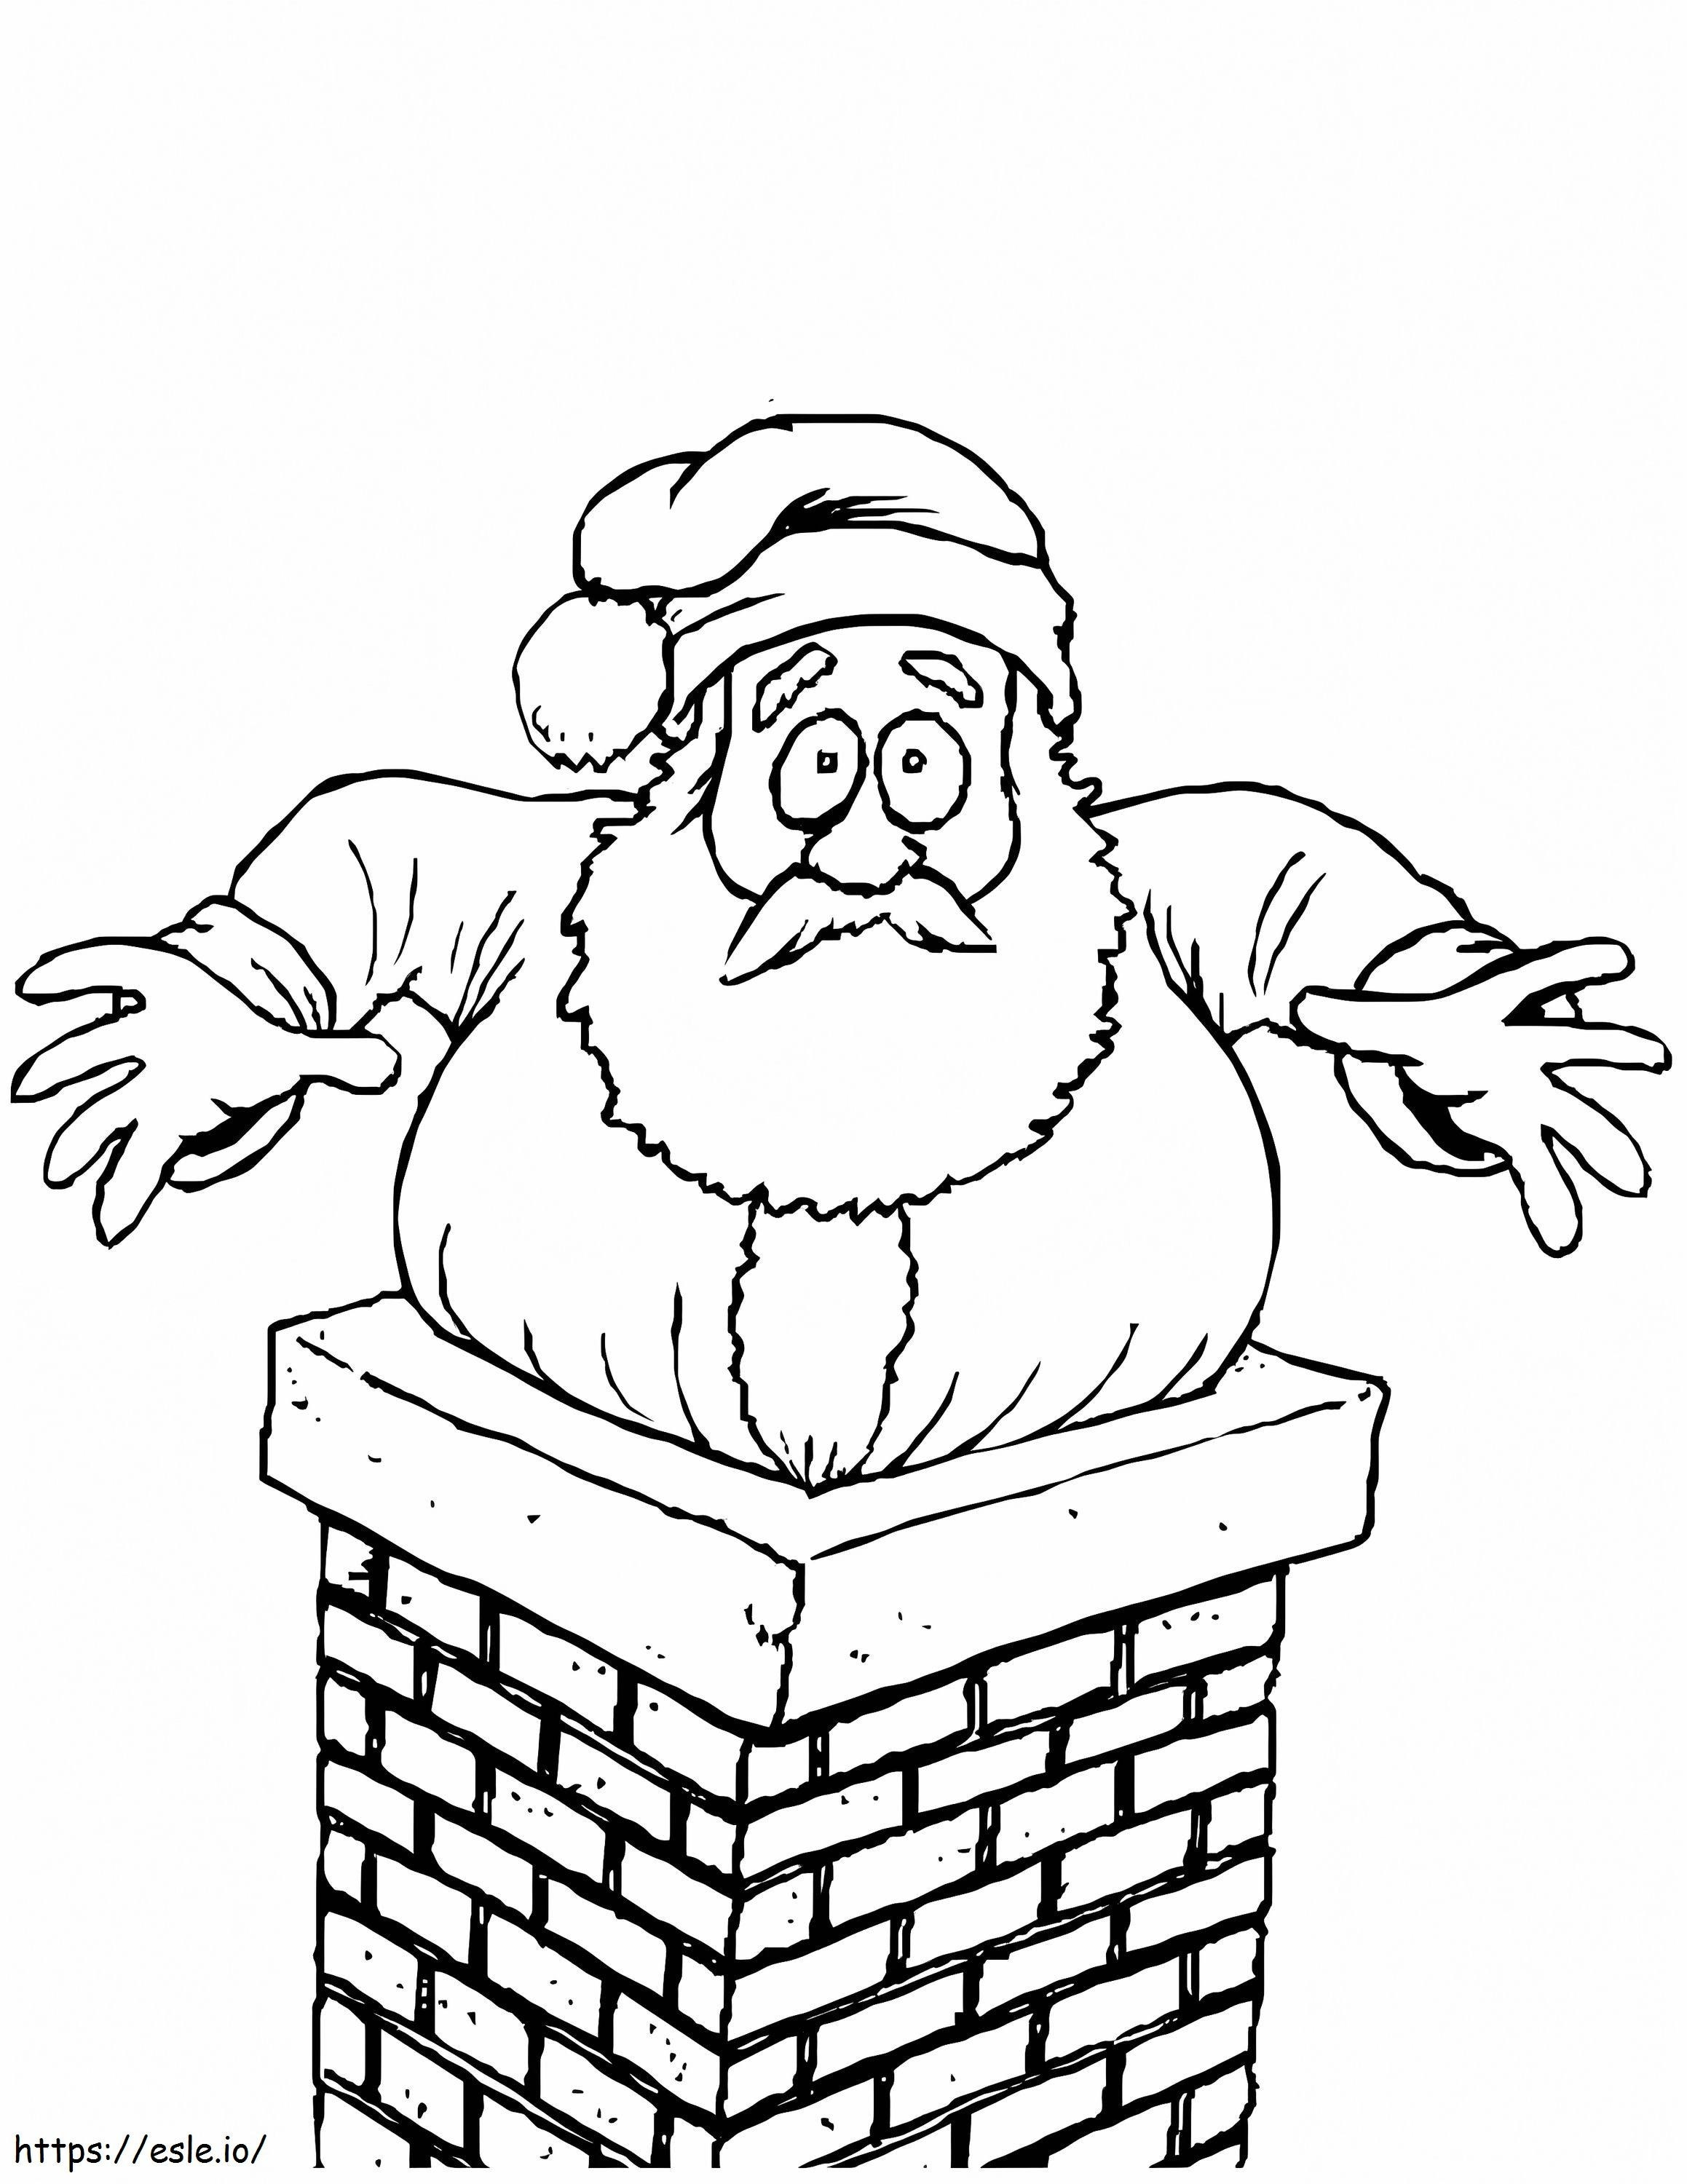 Santa Stuck In The Chimney coloring page